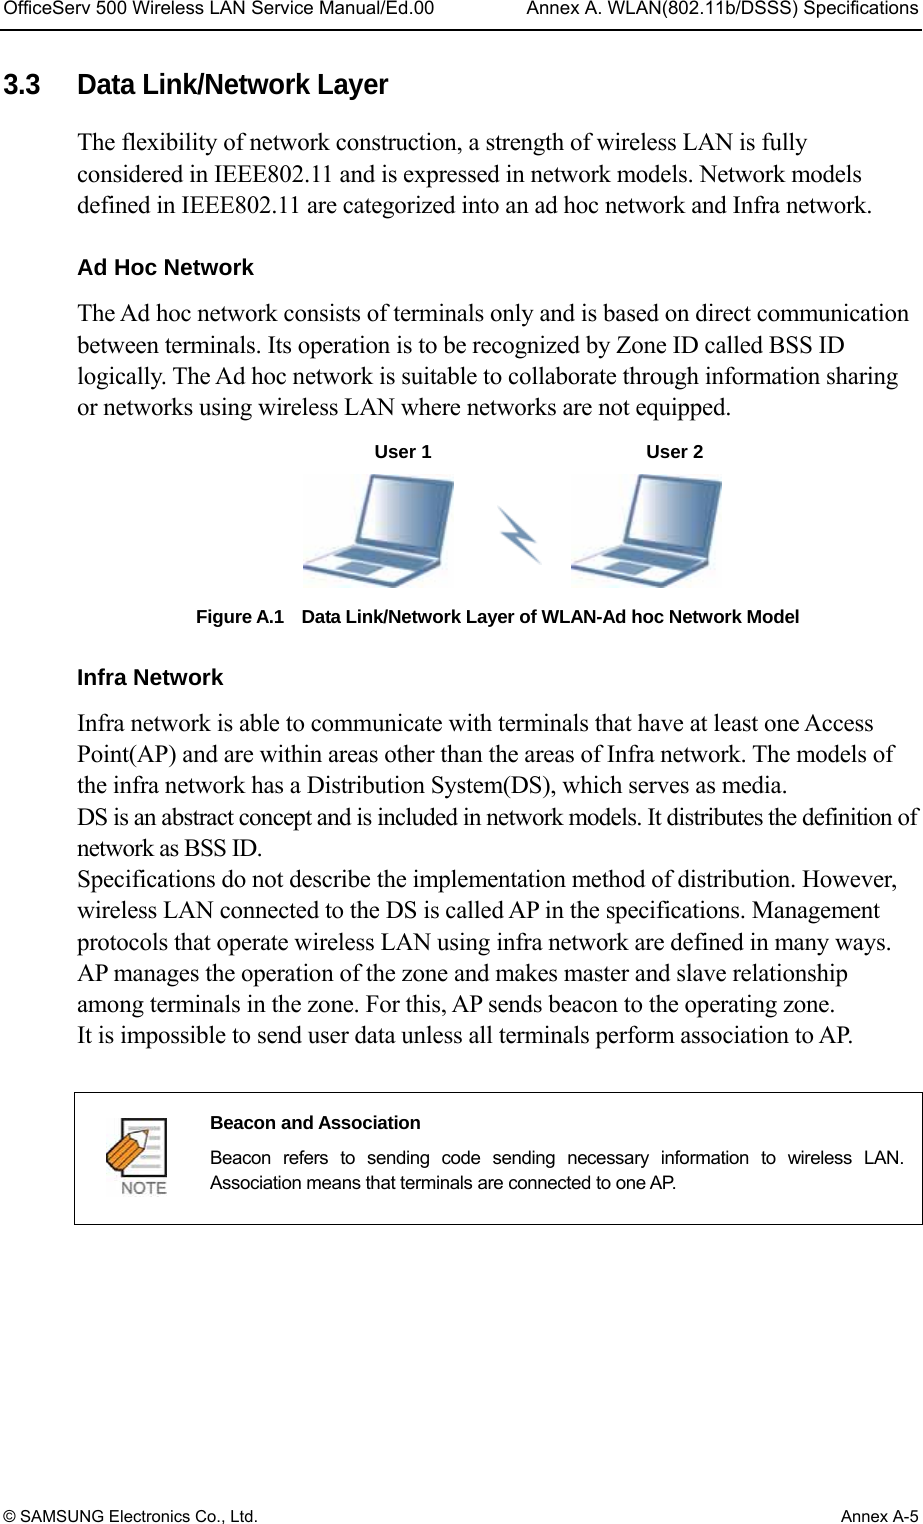 OfficeServ 500 Wireless LAN Service Manual/Ed.00  Annex A. WLAN(802.11b/DSSS) Specifications © SAMSUNG Electronics Co., Ltd.  Annex A-5 3.3  Data Link/Network Layer The flexibility of network construction, a strength of wireless LAN is fully considered in IEEE802.11 and is expressed in network models. Network models defined in IEEE802.11 are categorized into an ad hoc network and Infra network.    Ad Hoc Network The Ad hoc network consists of terminals only and is based on direct communication between terminals. Its operation is to be recognized by Zone ID called BSS ID logically. The Ad hoc network is suitable to collaborate through information sharing or networks using wireless LAN where networks are not equipped. Figure A.1    Data Link/Network Layer of WLAN-Ad hoc Network Model  Infra Network Infra network is able to communicate with terminals that have at least one Access Point(AP) and are within areas other than the areas of Infra network. The models of the infra network has a Distribution System(DS), which serves as media.   DS is an abstract concept and is included in network models. It distributes the definition of network as BSS ID.   Specifications do not describe the implementation method of distribution. However, wireless LAN connected to the DS is called AP in the specifications. Management protocols that operate wireless LAN using infra network are defined in many ways. AP manages the operation of the zone and makes master and slave relationship among terminals in the zone. For this, AP sends beacon to the operating zone.   It is impossible to send user data unless all terminals perform association to AP.   Beacon and Association   Beacon refers to sending code sending necessary information to wireless LAN. Association means that terminals are connected to one AP.    User 1 User 2 